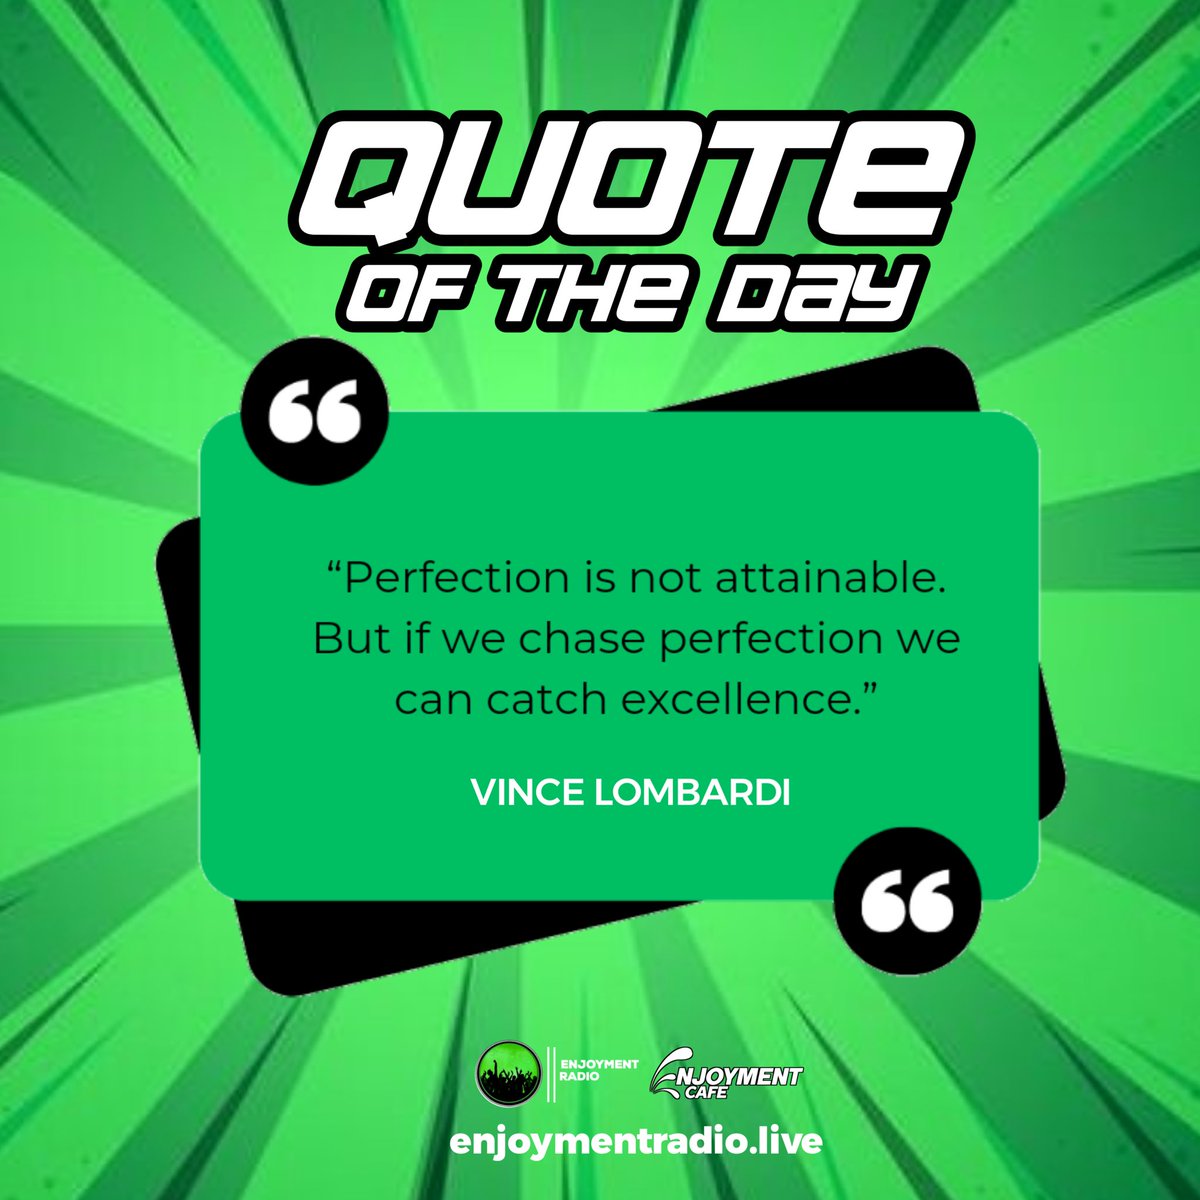 ✳🟩QUOTE OF THE DAY⬛❇
 BY:- @vincelombardi 
Excellence is attainable when we chase perfection 
#BeInspired💯
#EnjoymentCafe ☕☕
#EnjoymentRadio 
#OnlineRadio 📻
#Inspiration #afropop #Accra #ghana #Motivaton #QuoteOfTheDay #BeTheChange